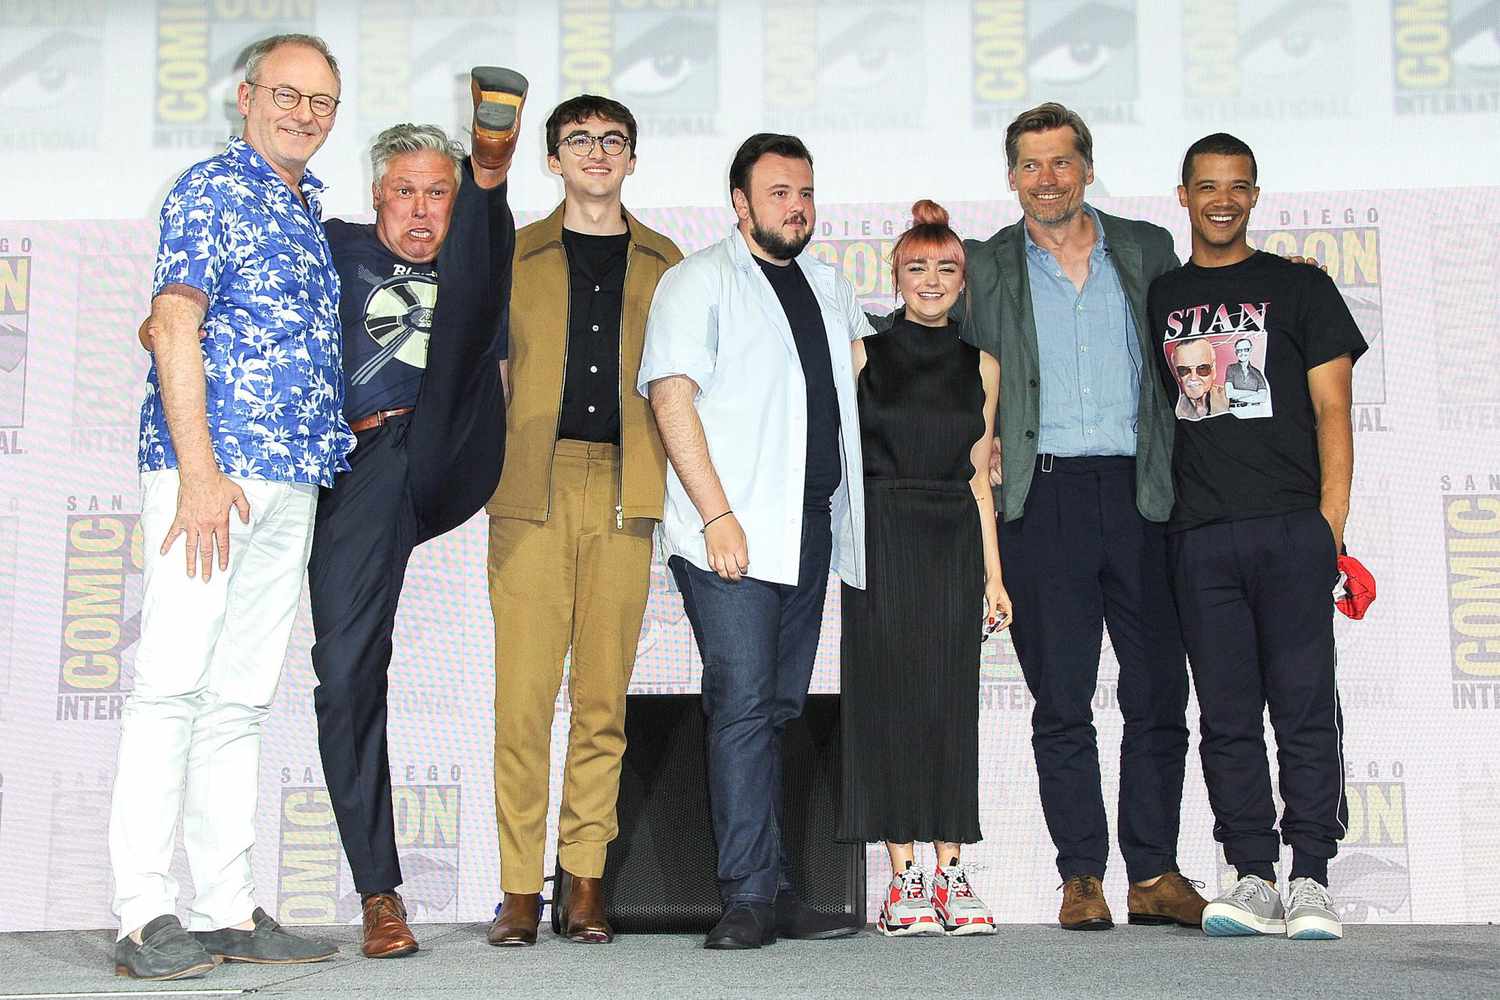 SAN DIEGO, CALIFORNIA - JULY 19: (L-R) Liam Cunningham, Conleth Hill, Isaac Hempstead Wright, John Bradley, Maisie Williams, Nikolaj Coster-Waldau and Jacob Anderson speak at the "Game Of Thrones" Panel And Q&A during 2019 Comic-Con International at San Diego Convention Center on July 19, 2019 in San Diego, California. (Photo by Albert L. Ortega/Getty Images)